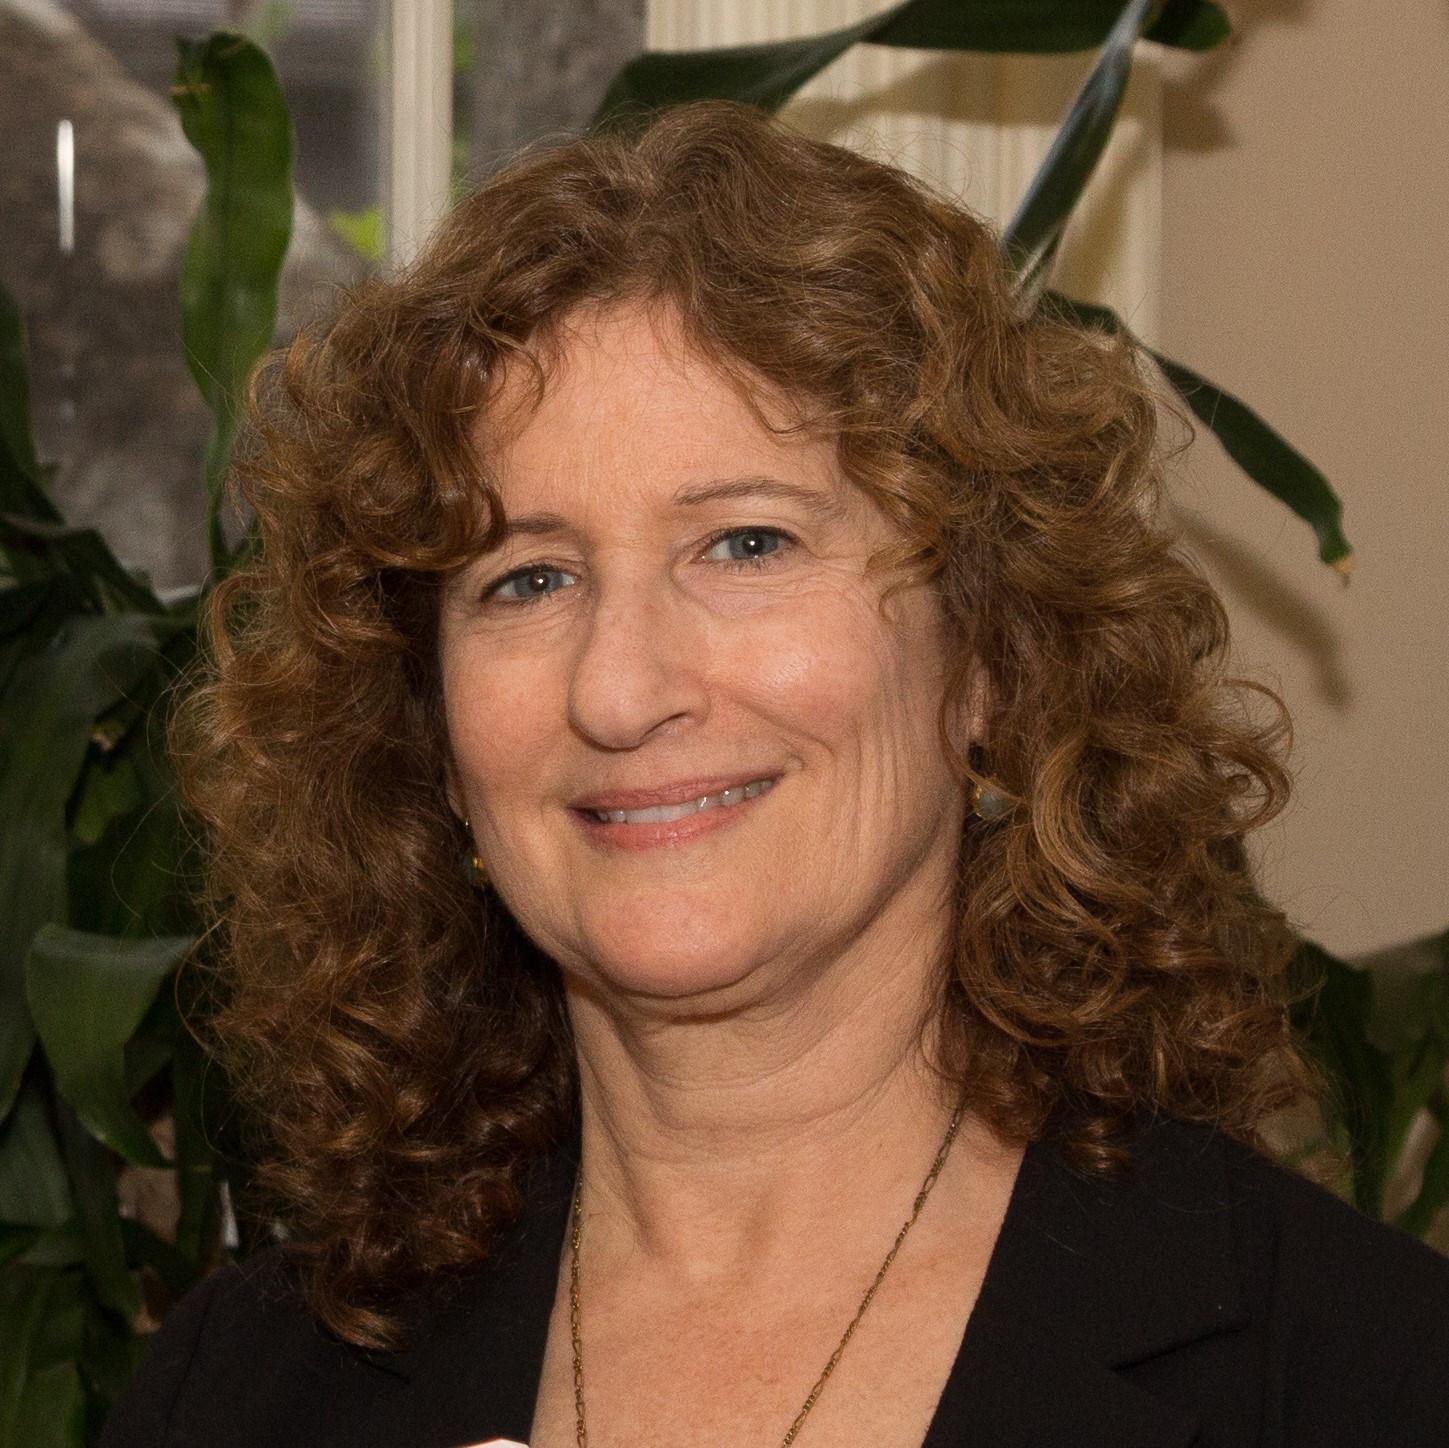 Susan Jacoby Stern